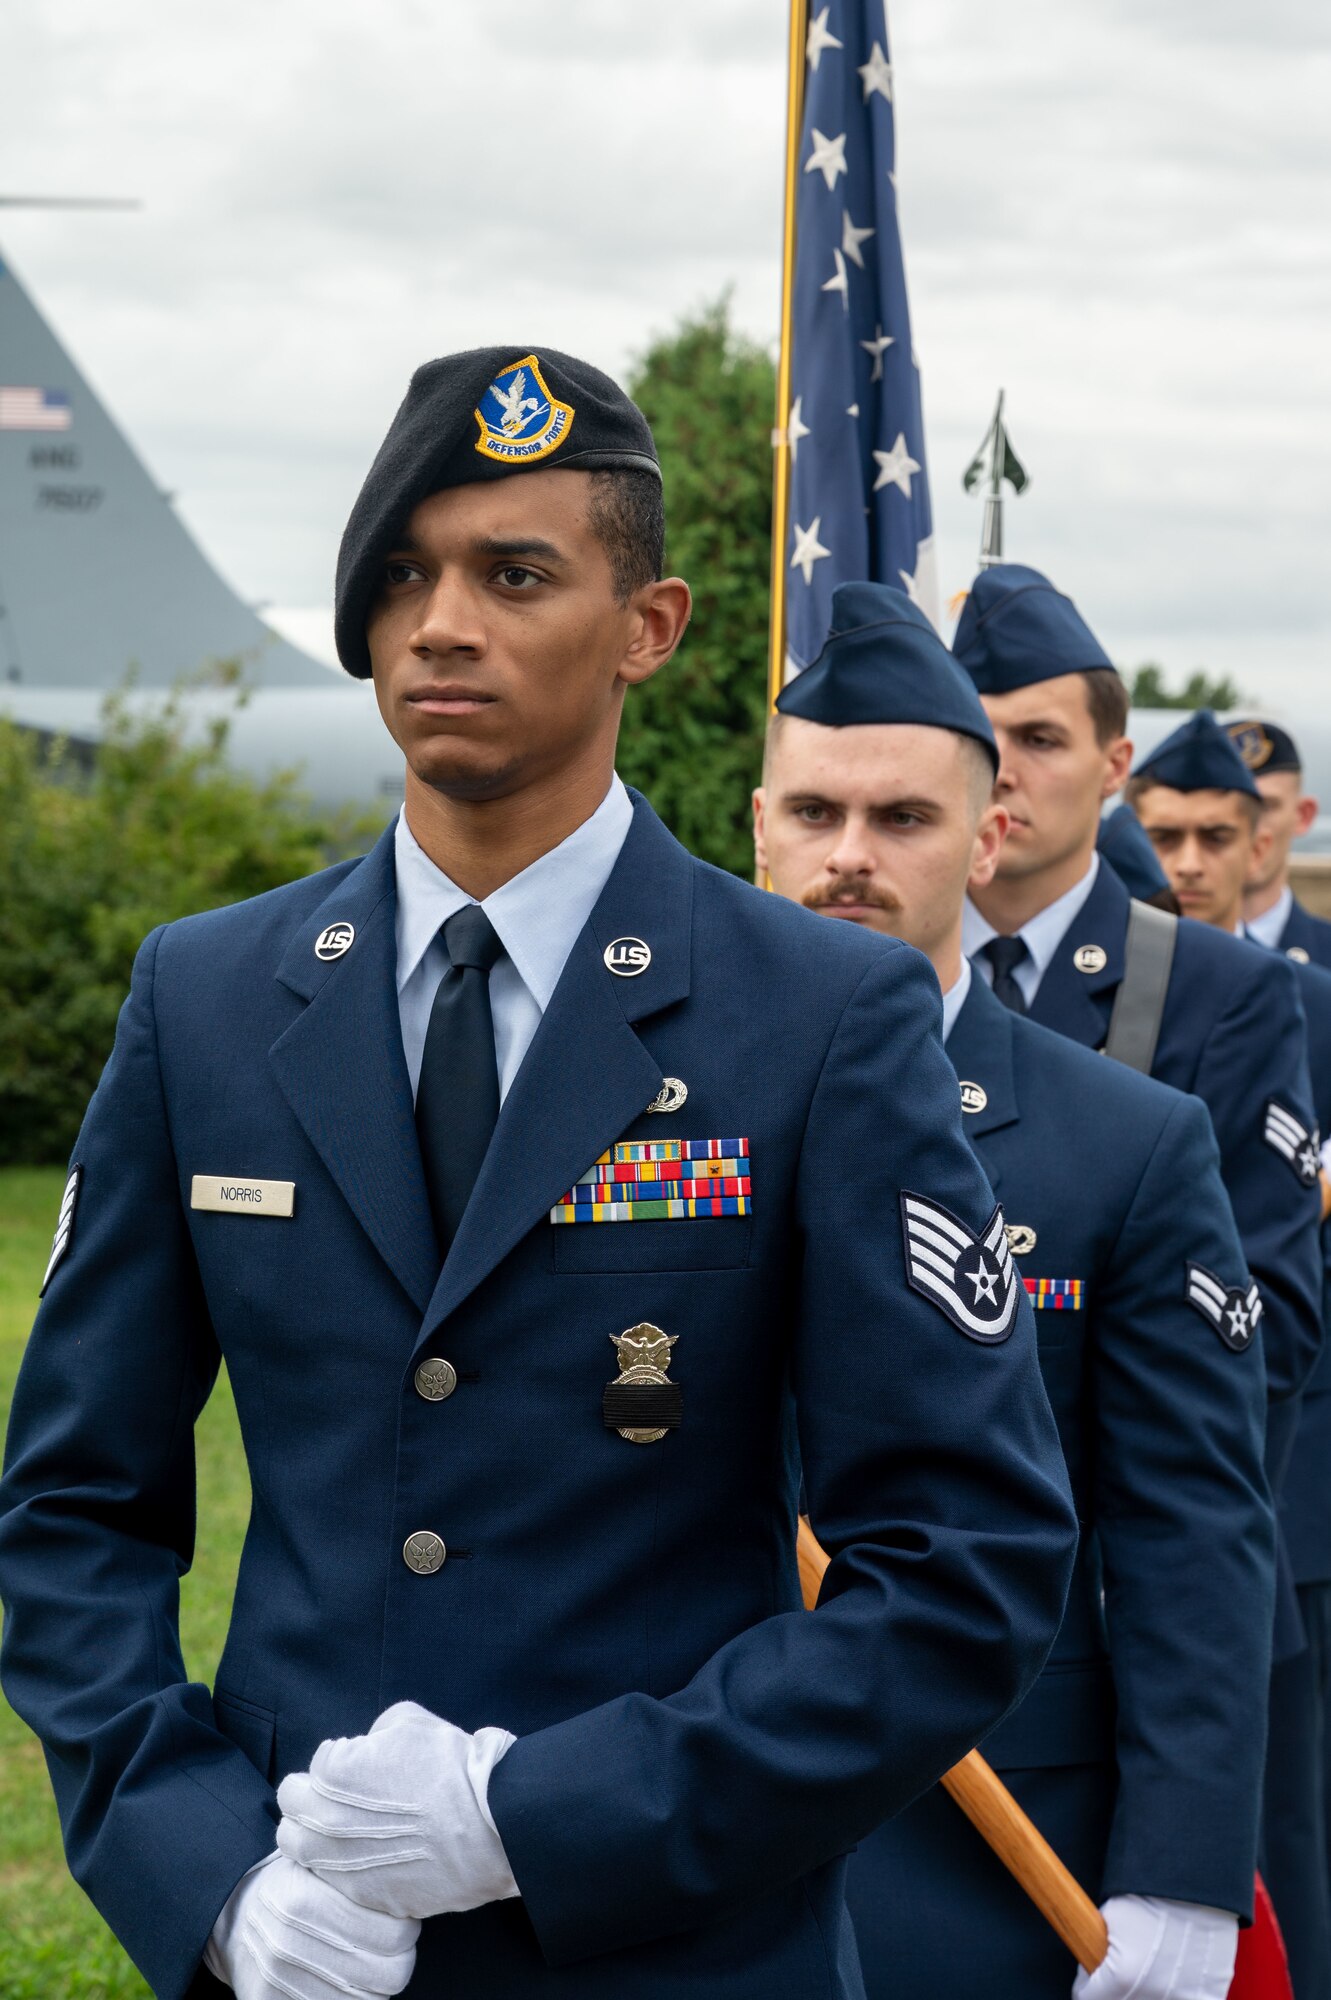 Members of Team Dover wait to present colors during the 21st Anniversary 9/11 Memorial Ceremony held at the Air Mobility Command Museum on Dover Air Force Base, Delaware, Sept. 11, 2022. The base hosted the ceremony to remember and honor those who perished in the attacks on Sept. 11, 2001. (U.S. Air Force photo by Senior Airman Cydney Lee)